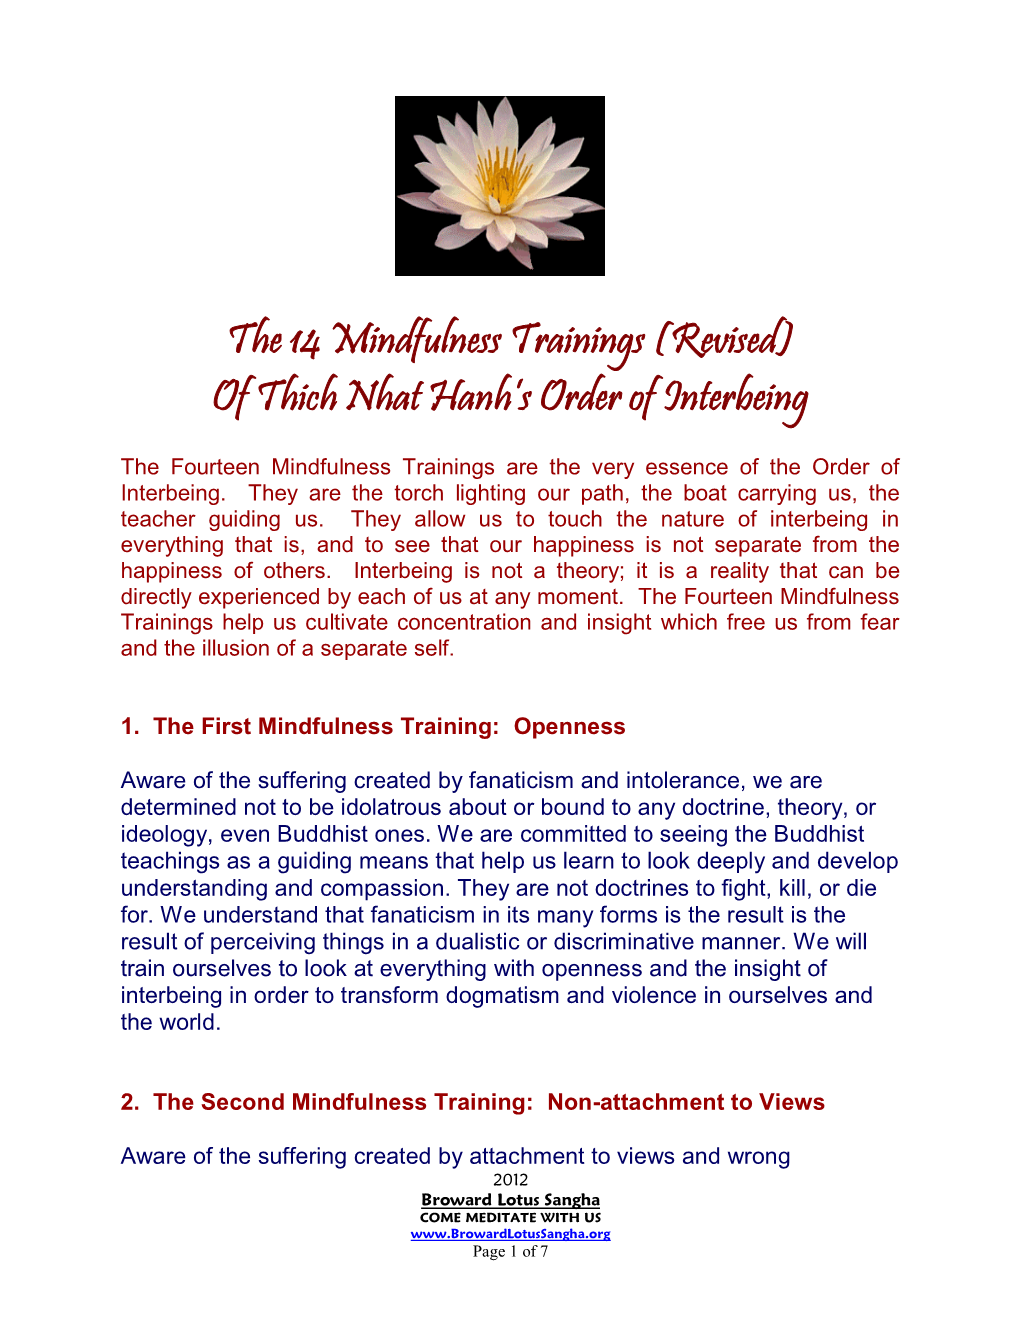 The 14 Mindfulness Trainings (Revised) of Thich Nhat Hanh's